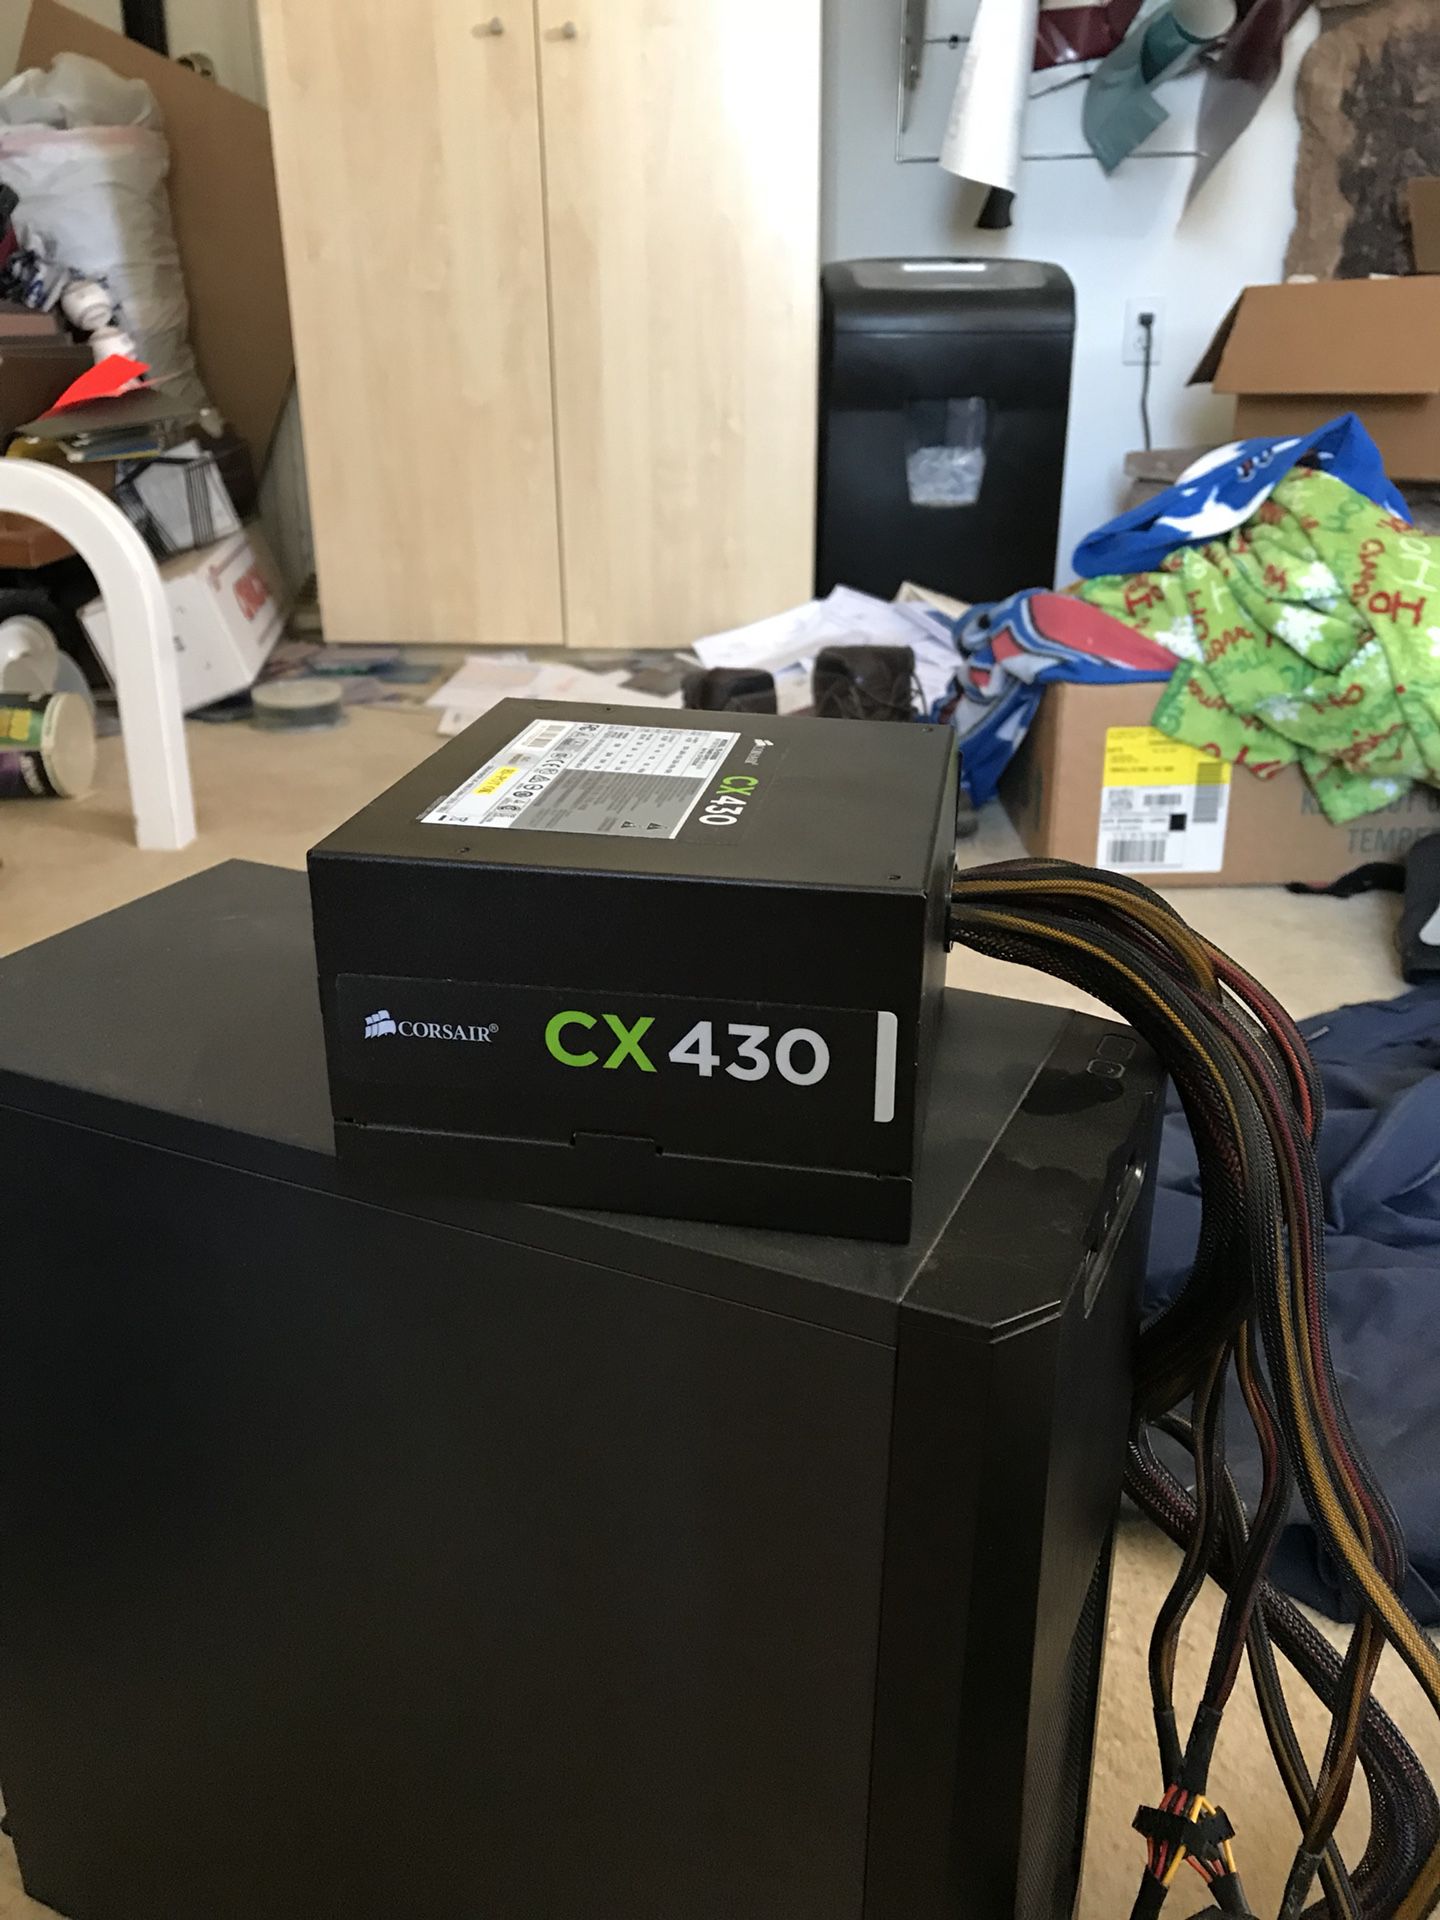 CX430 Power Supply Sale in Temecula, CA - OfferUp